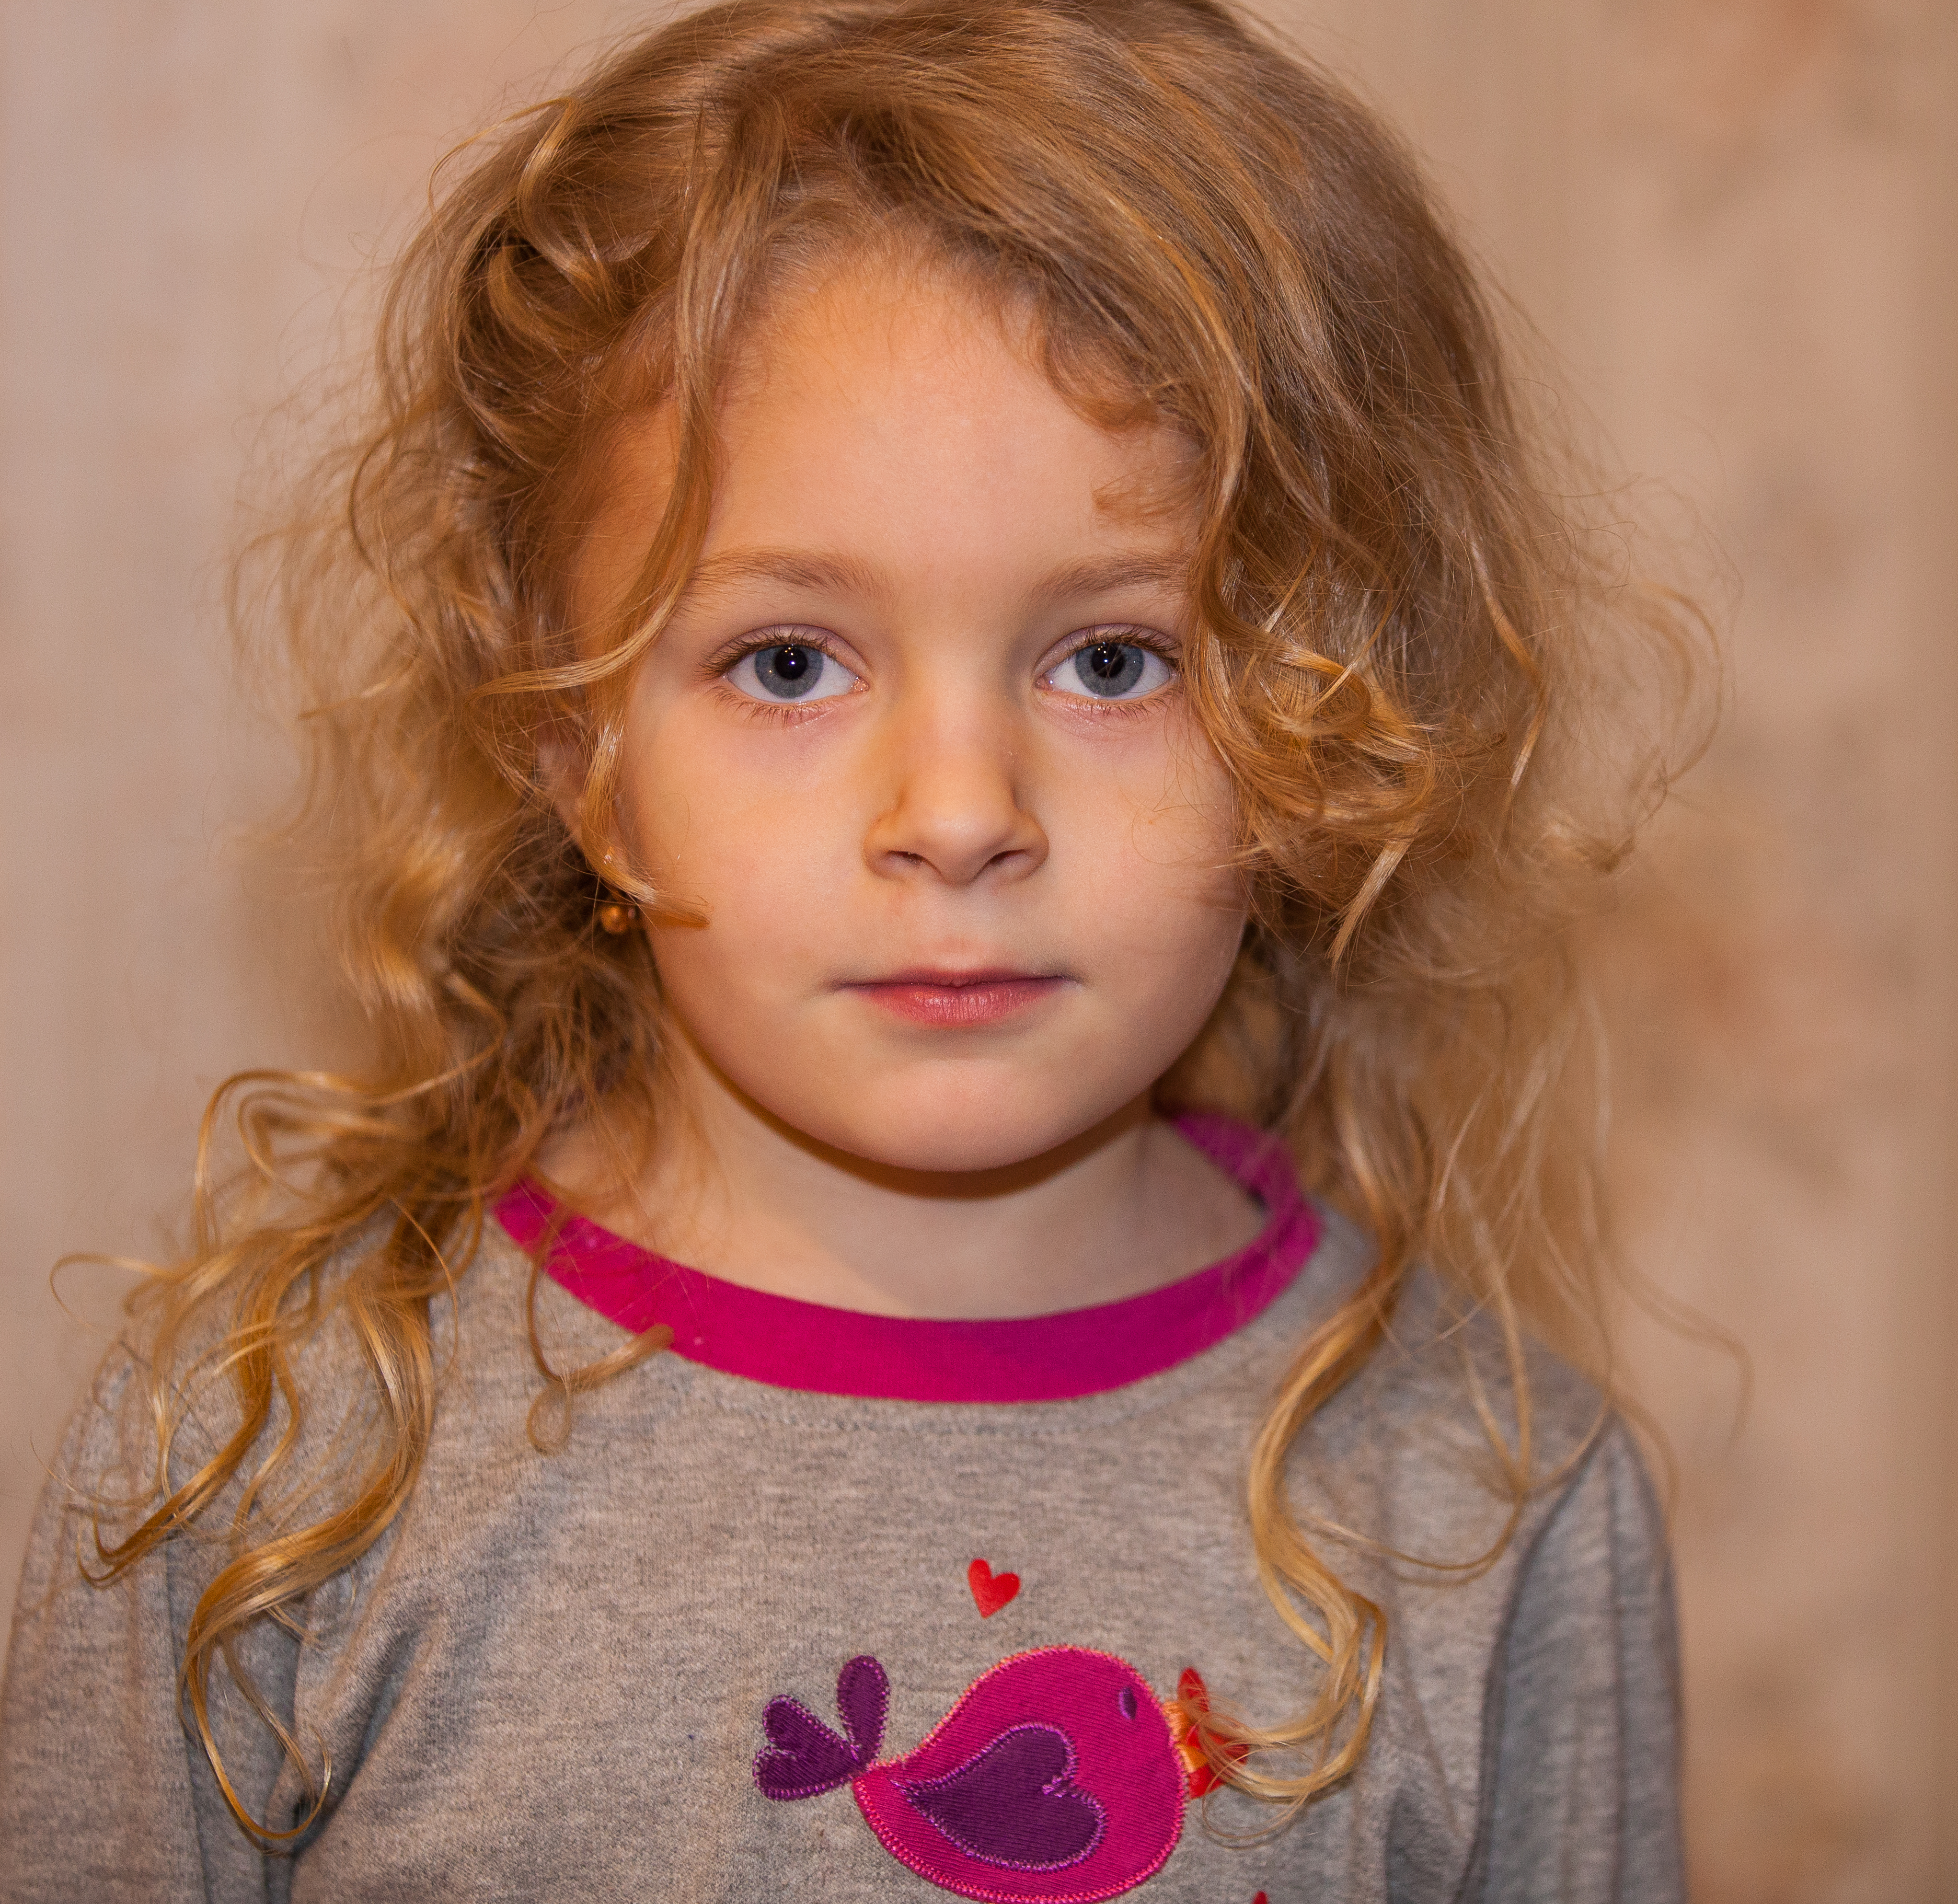 a cute blond child girl photographed in January 2014, photo 1 out of 4